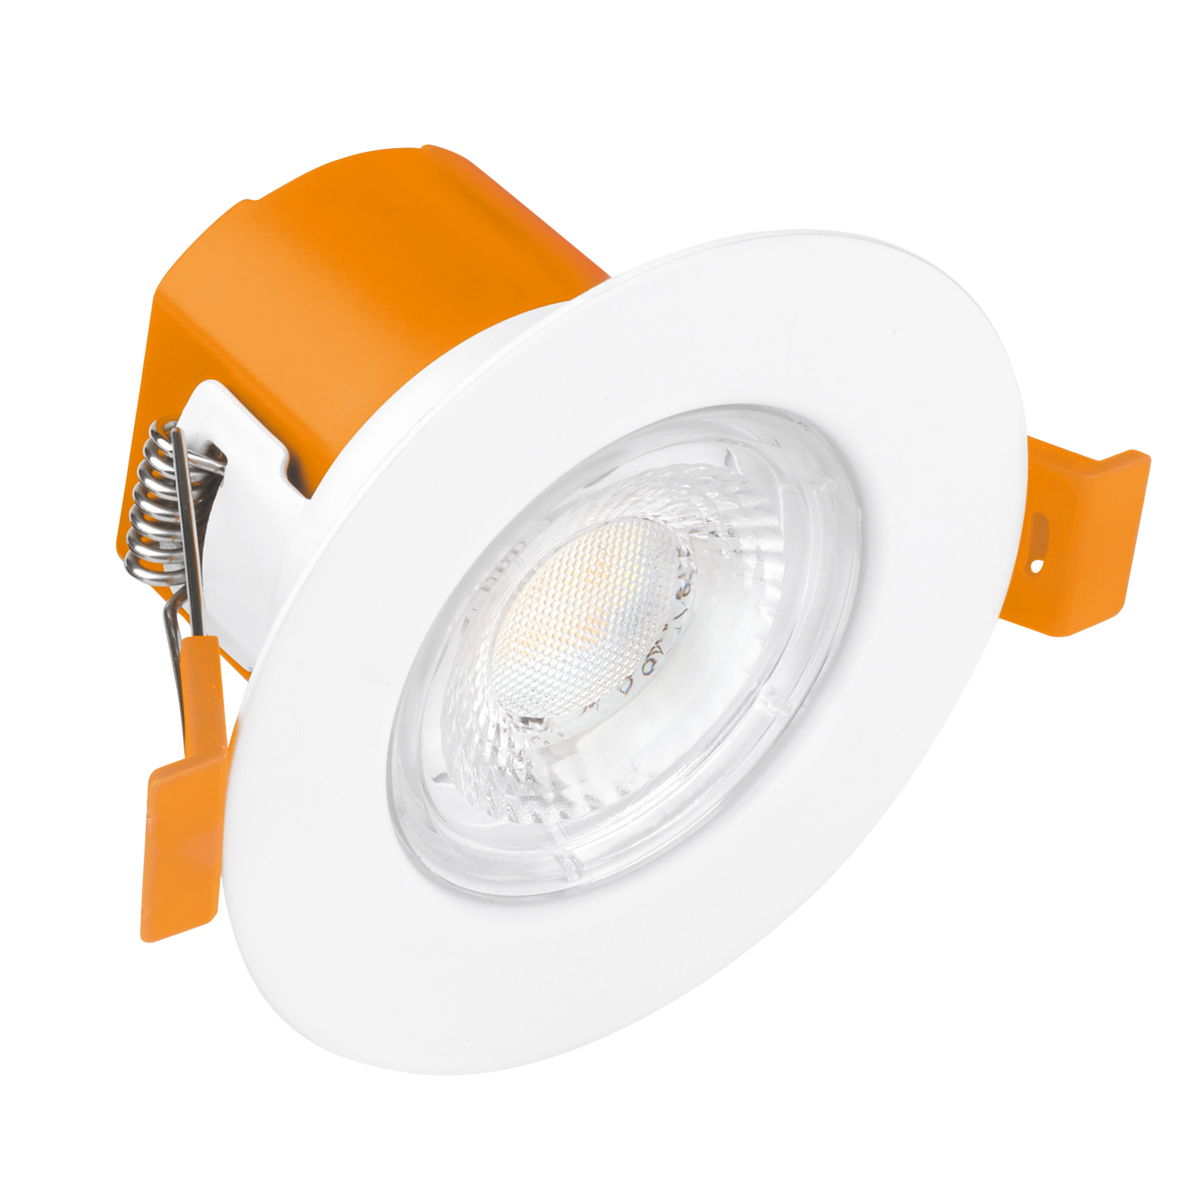 Enlite IP65 Dimmable LED Fire-Rated Downlights